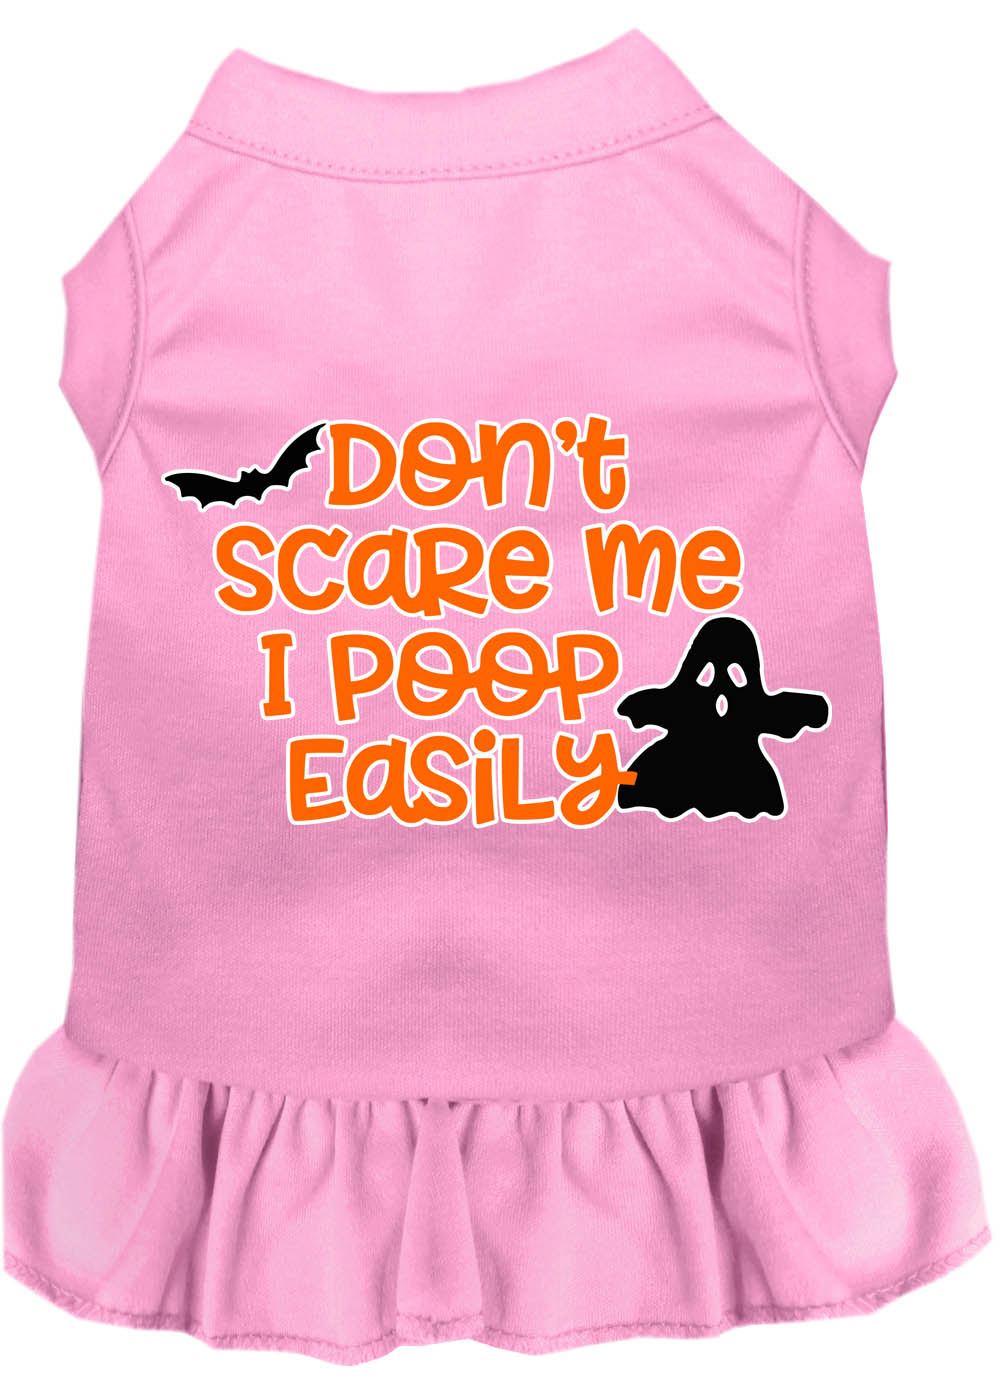 Don't Scare Me, Poops Easily Screen Print Dog Dress Light Pink Sm